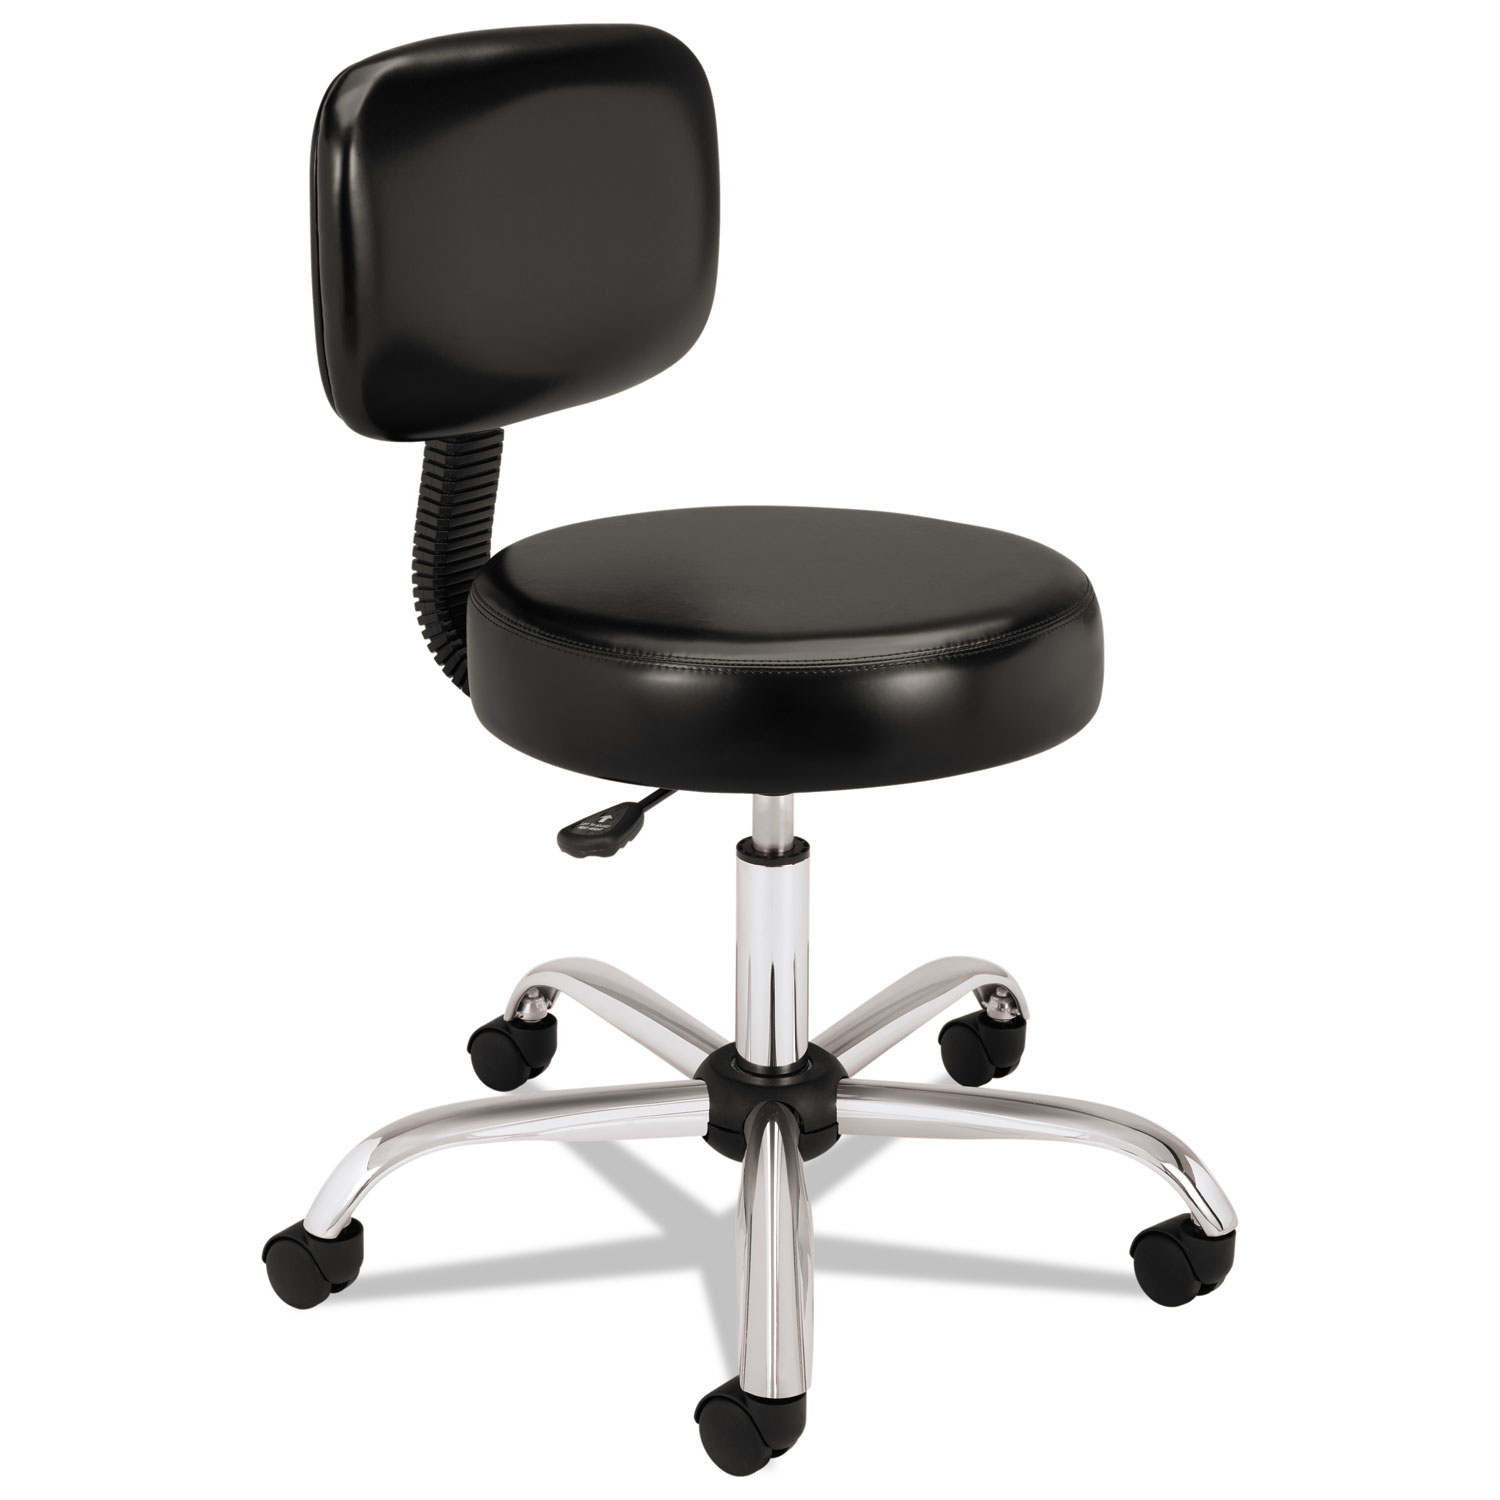  HON HMTS11.EA11 Adjustable Task/Lab Stool with Back, 22 Seat Height, Supports up to 250 lbs., Black Seat/Black Back, Steel Base (HONMTS11EA11) 